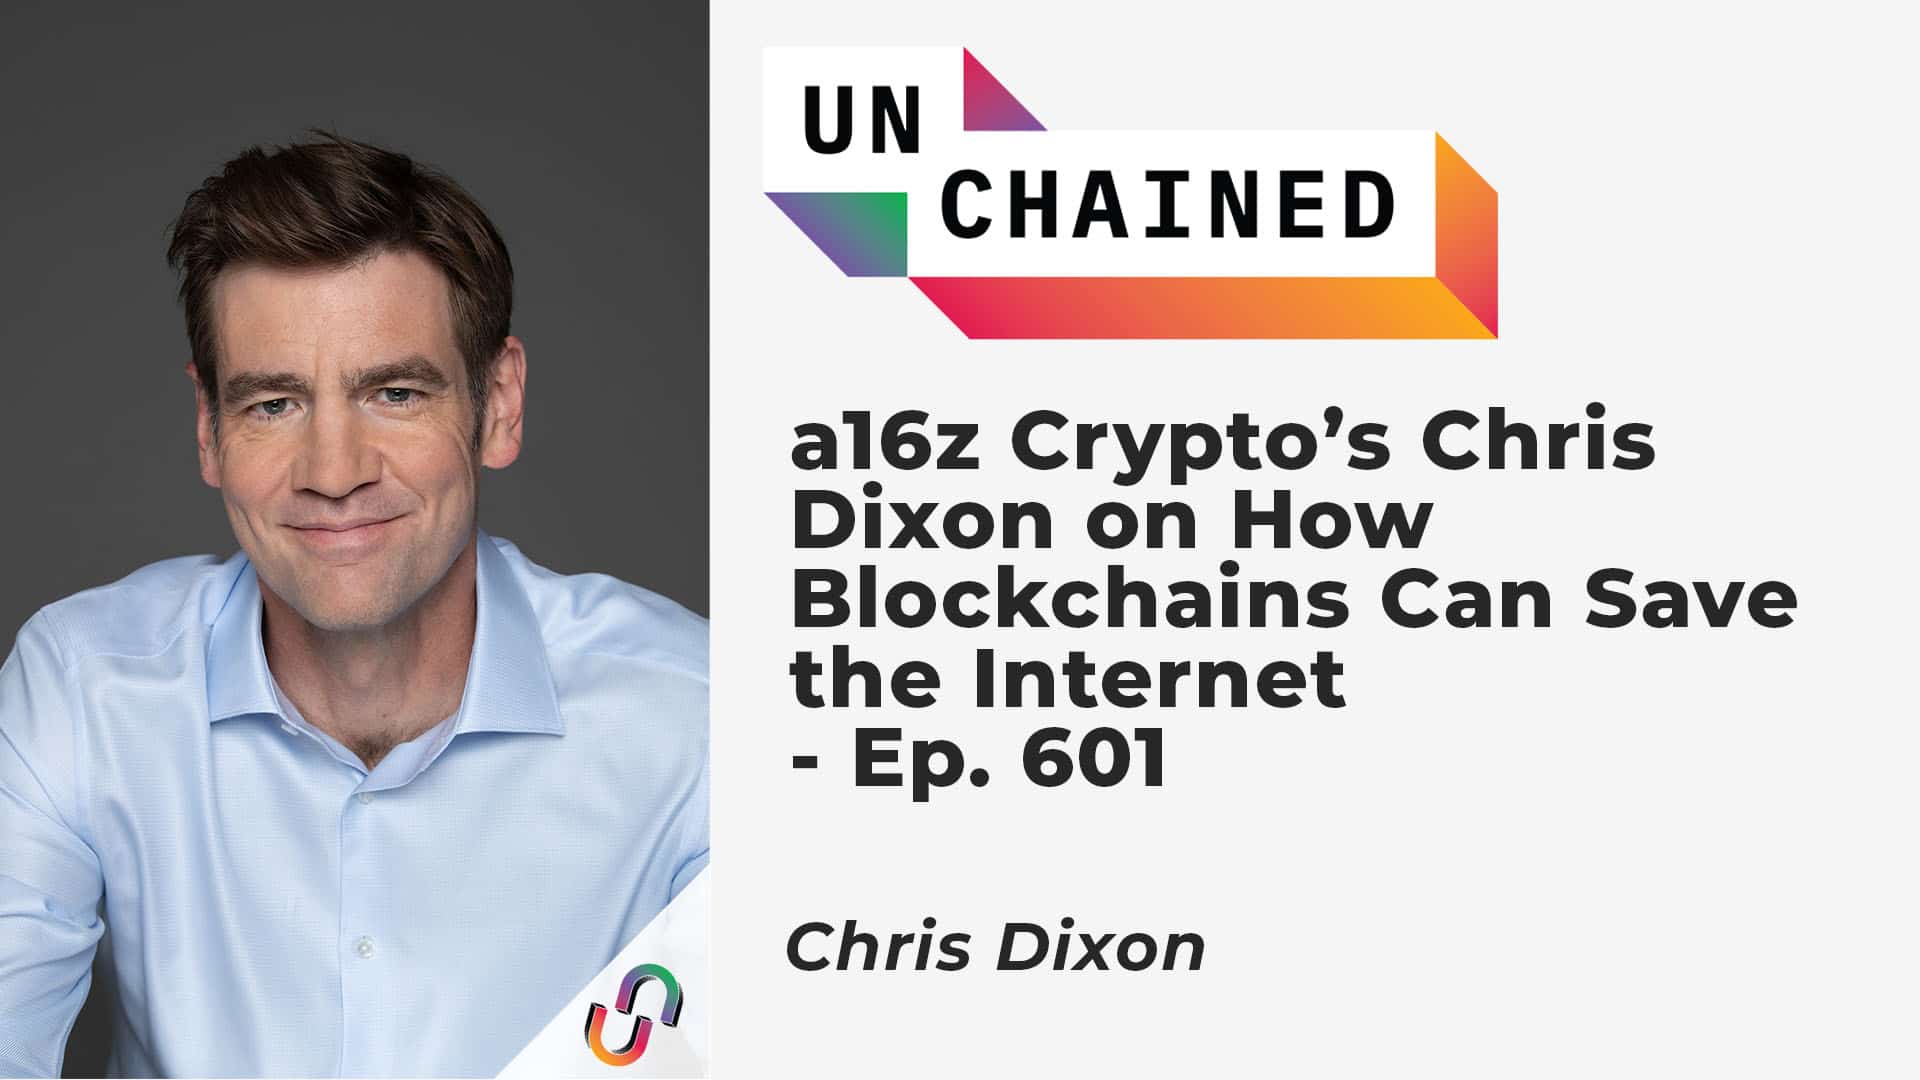 A16z Crypto’s Chris Dixon on How Blockchains Can Save the Internet - Ep. 601